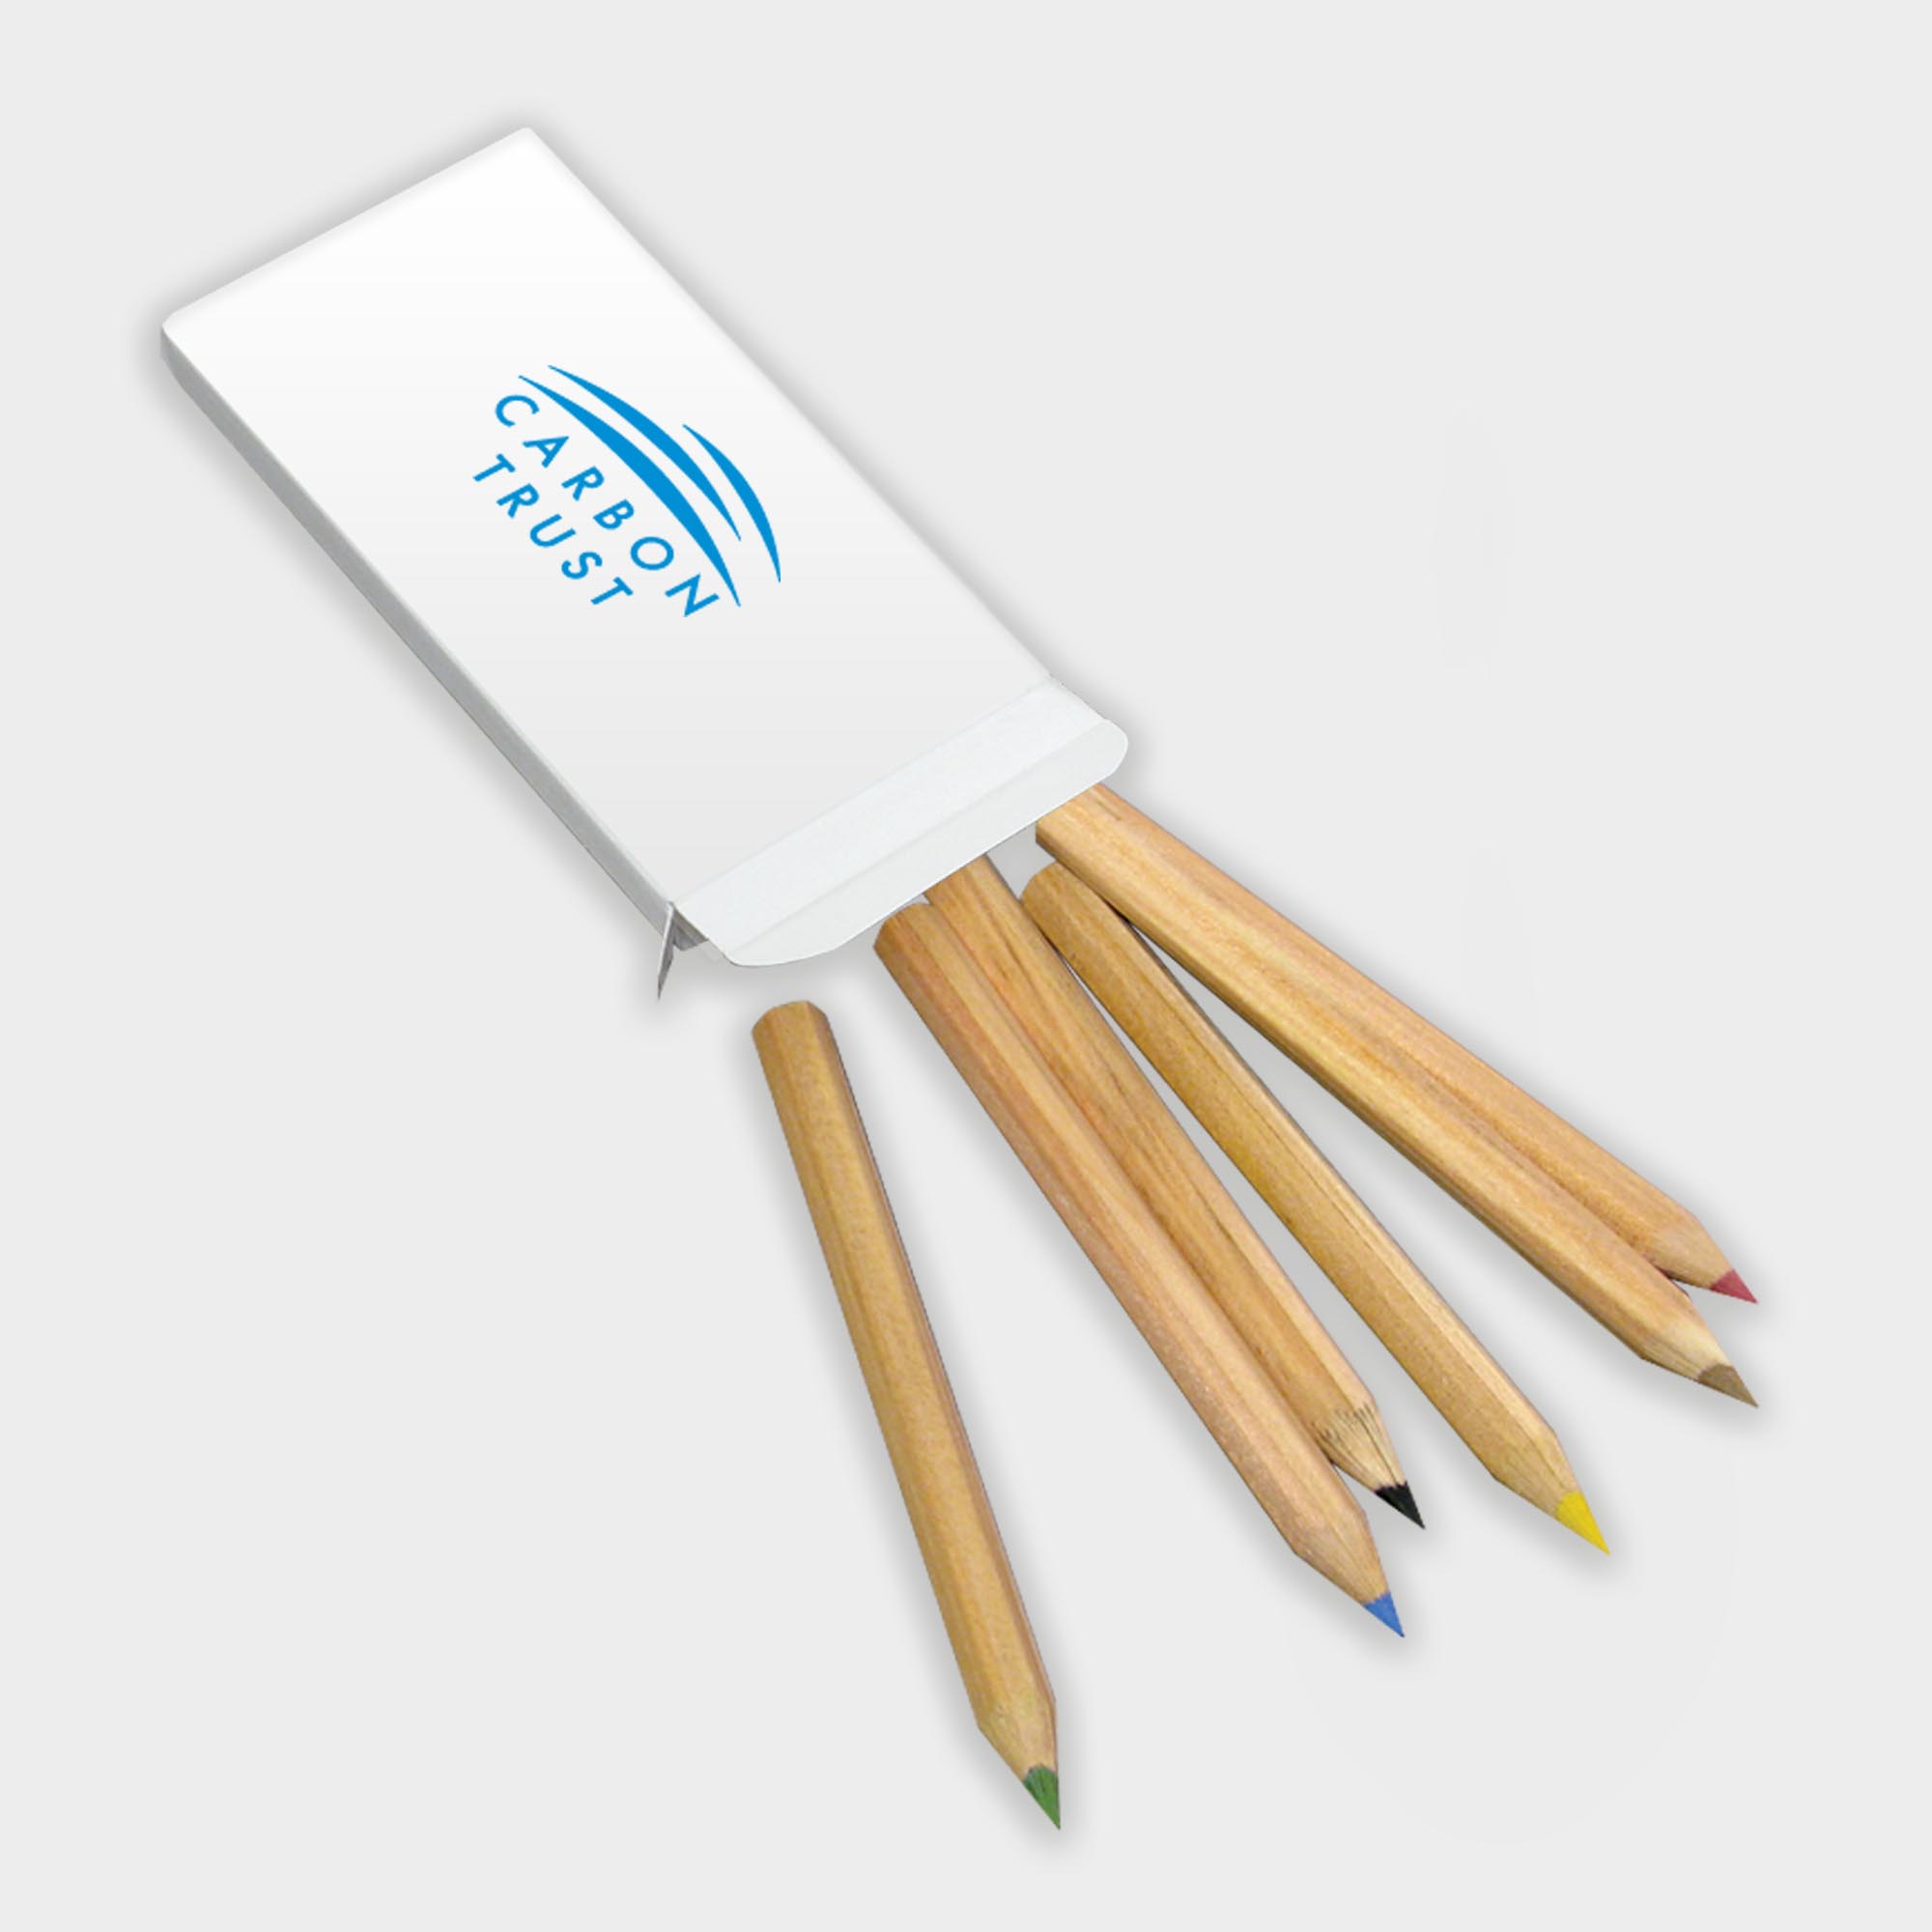 The Green & Good 1/2 Size Colouring Pack comes with 6 half length colouring pencils. The natural pencils are made from sustainable timber and are packed in a white recycled card box. This can be printed all over from 2500pcs.